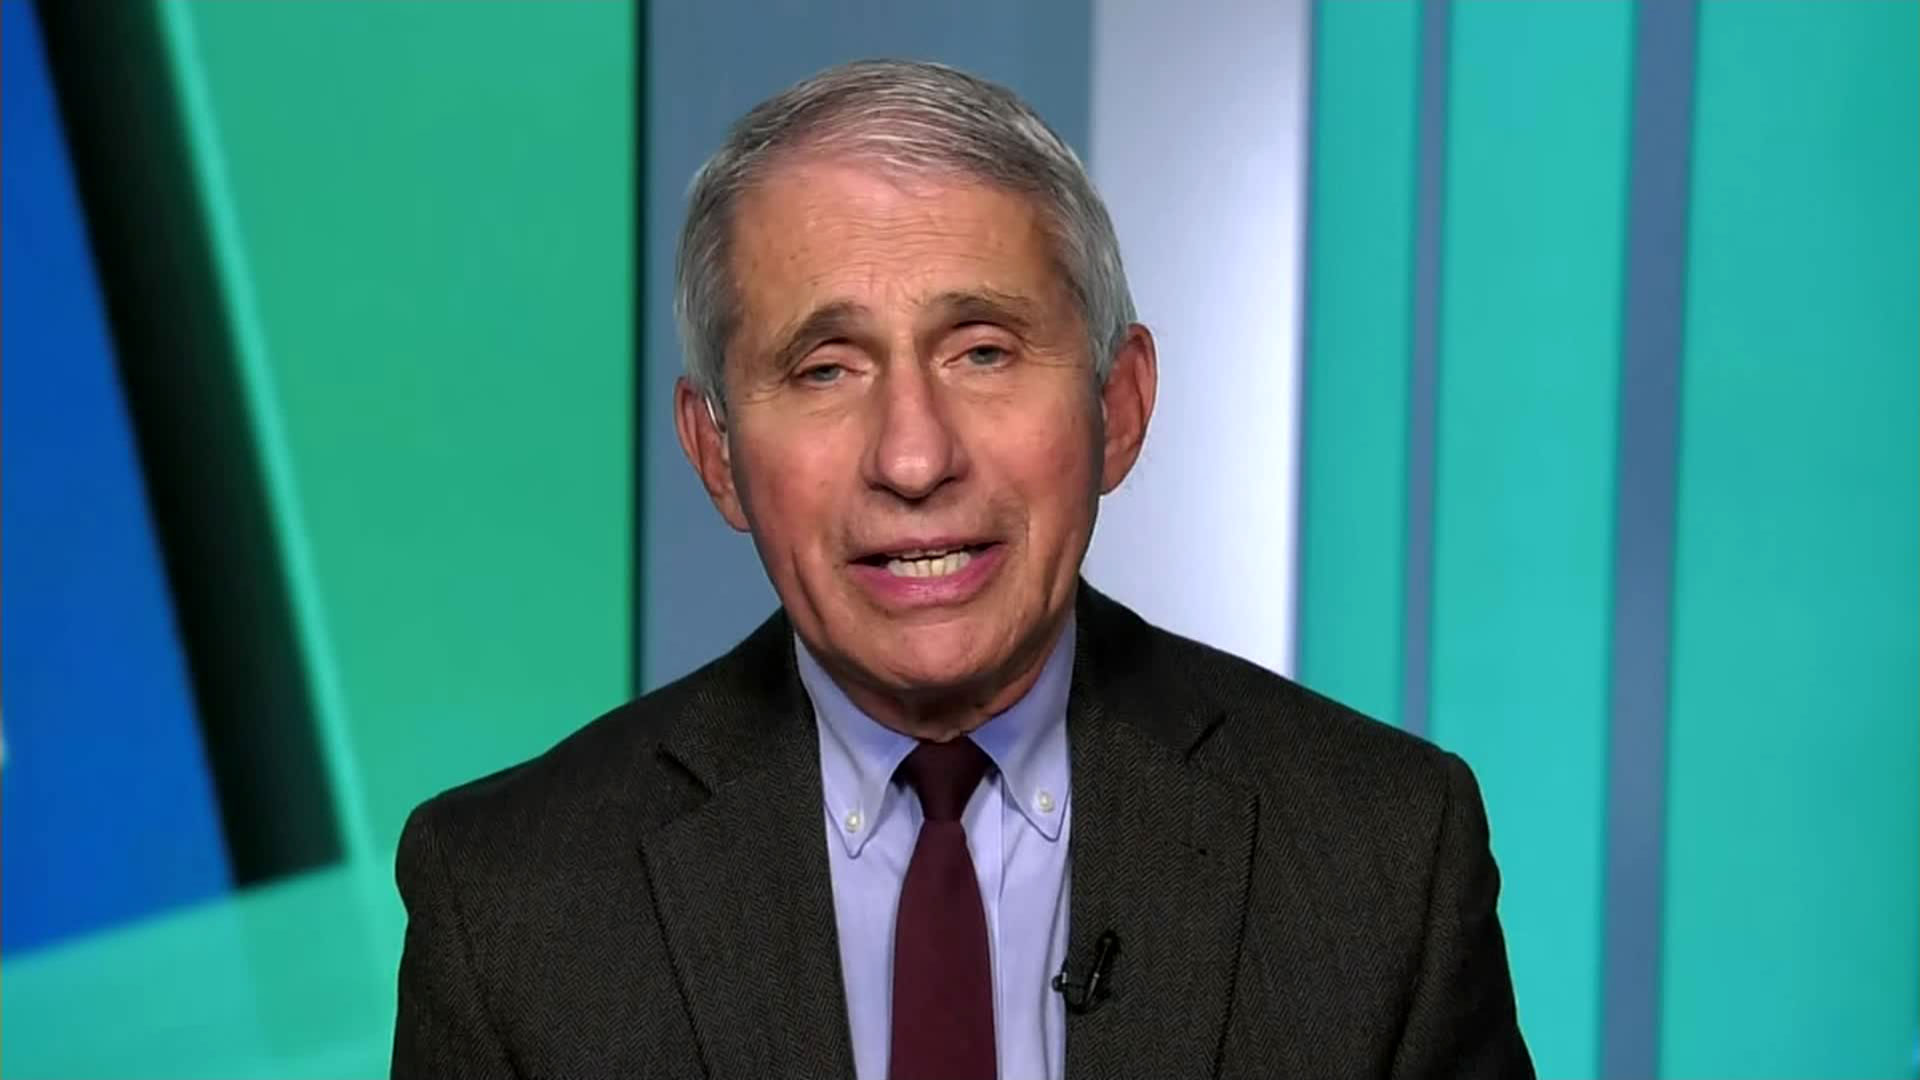 Dr. Anthony Fauci speaks with CNN on Monday, October 12.